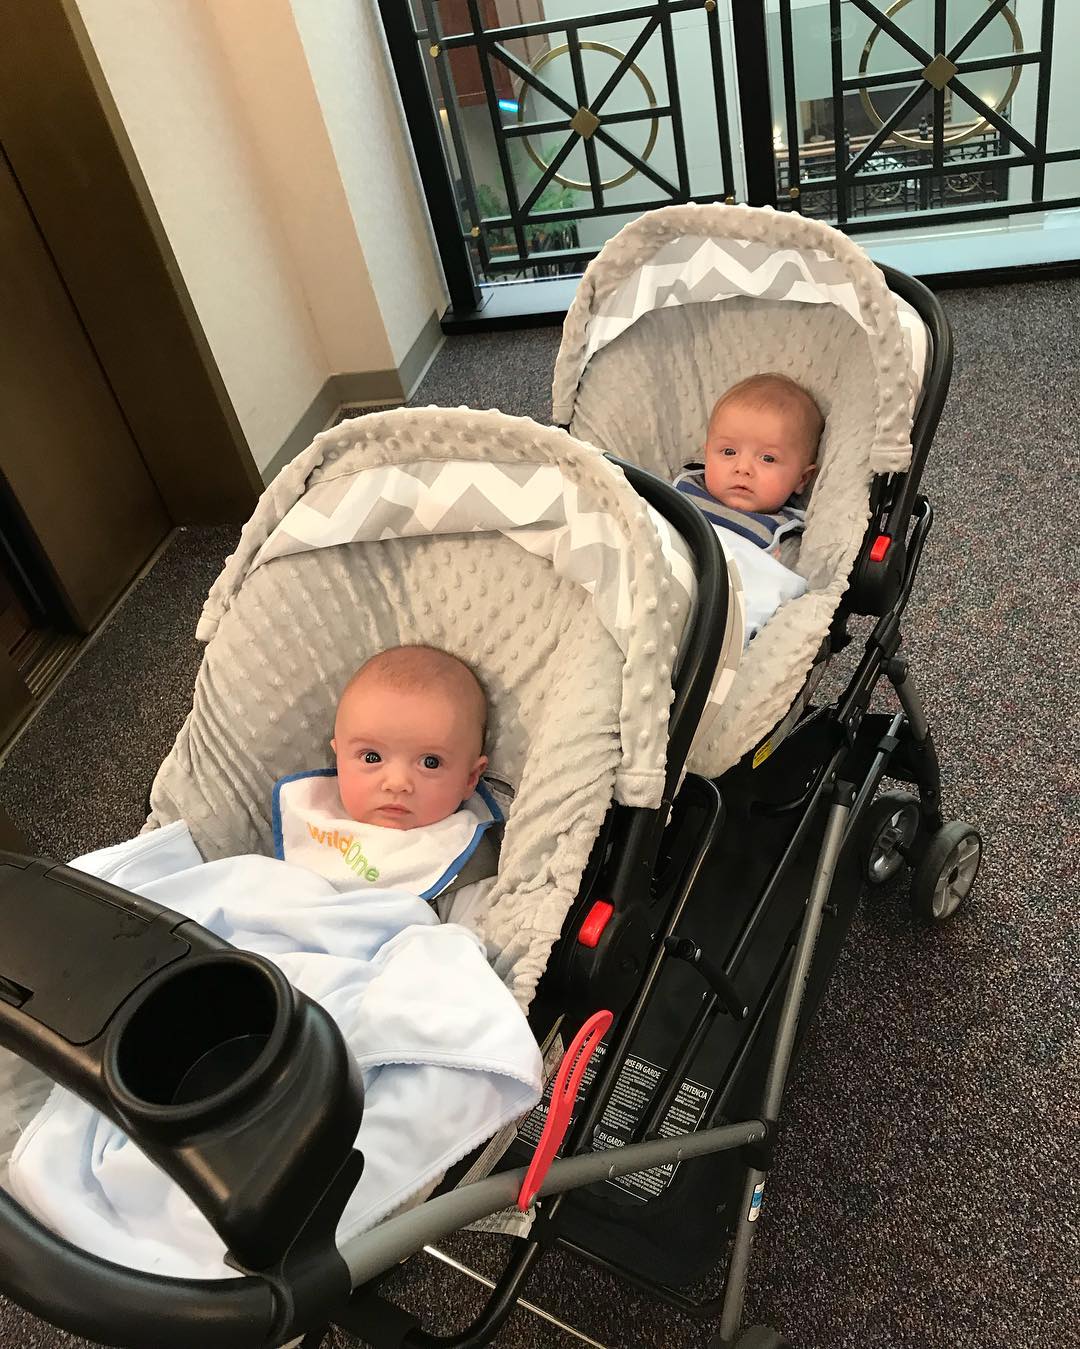 Just finished our 4 month appointment with Dr. Hart! George is 12lbs 2oz and Henry is 14 6oz! We are growing and somewhat happy after our shots! #onward #twinslife